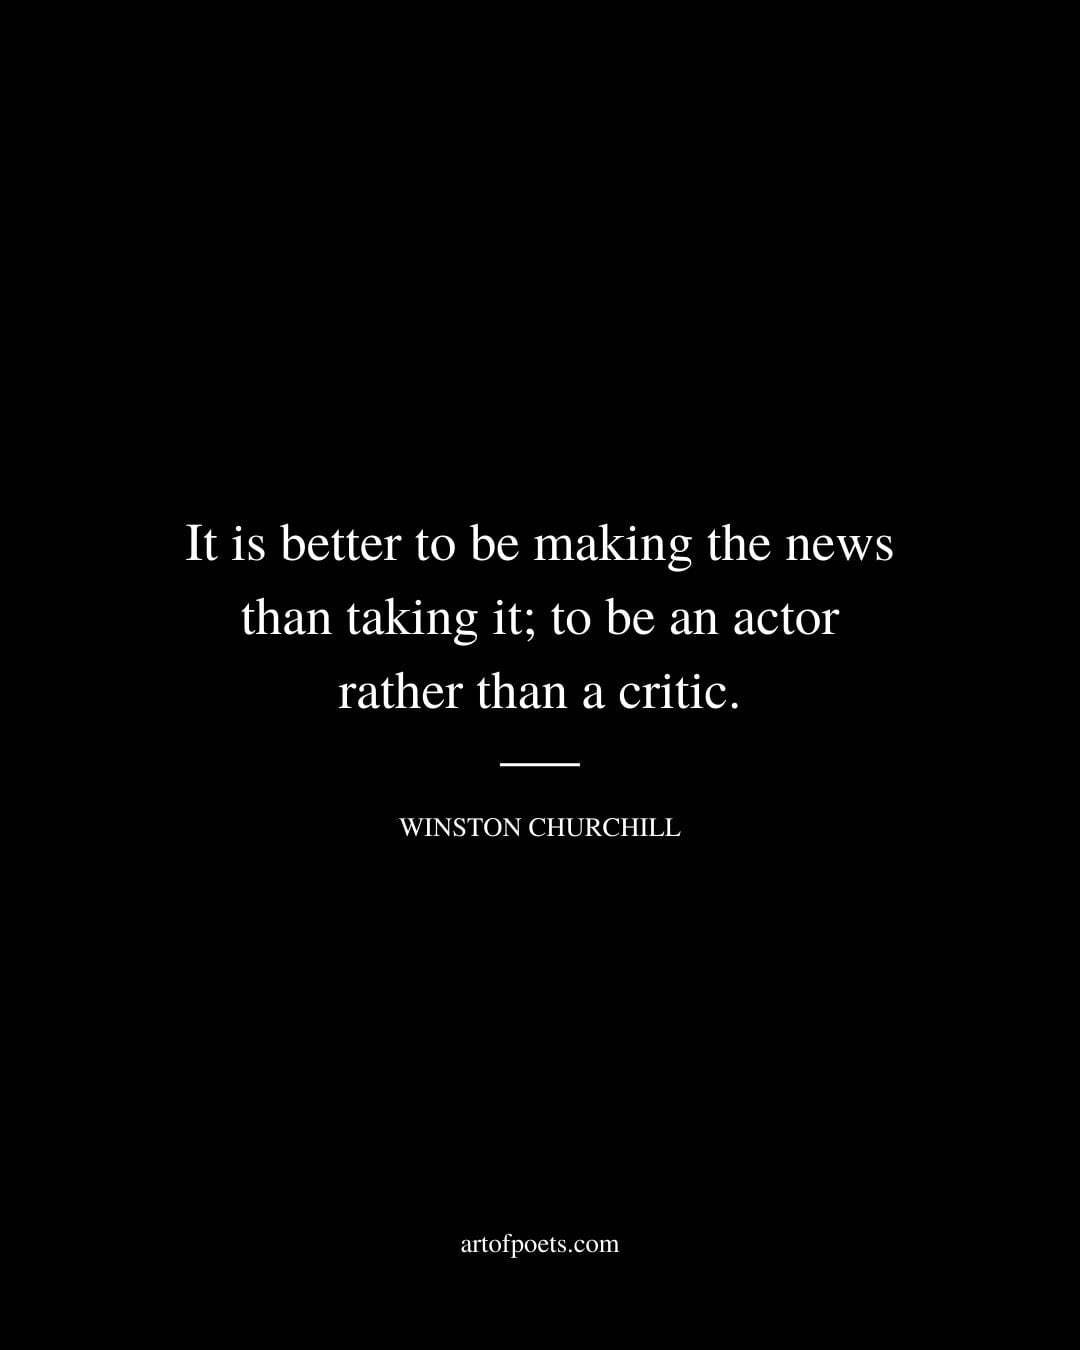 It is better to be making the news than taking it to be an actor rather than a critic